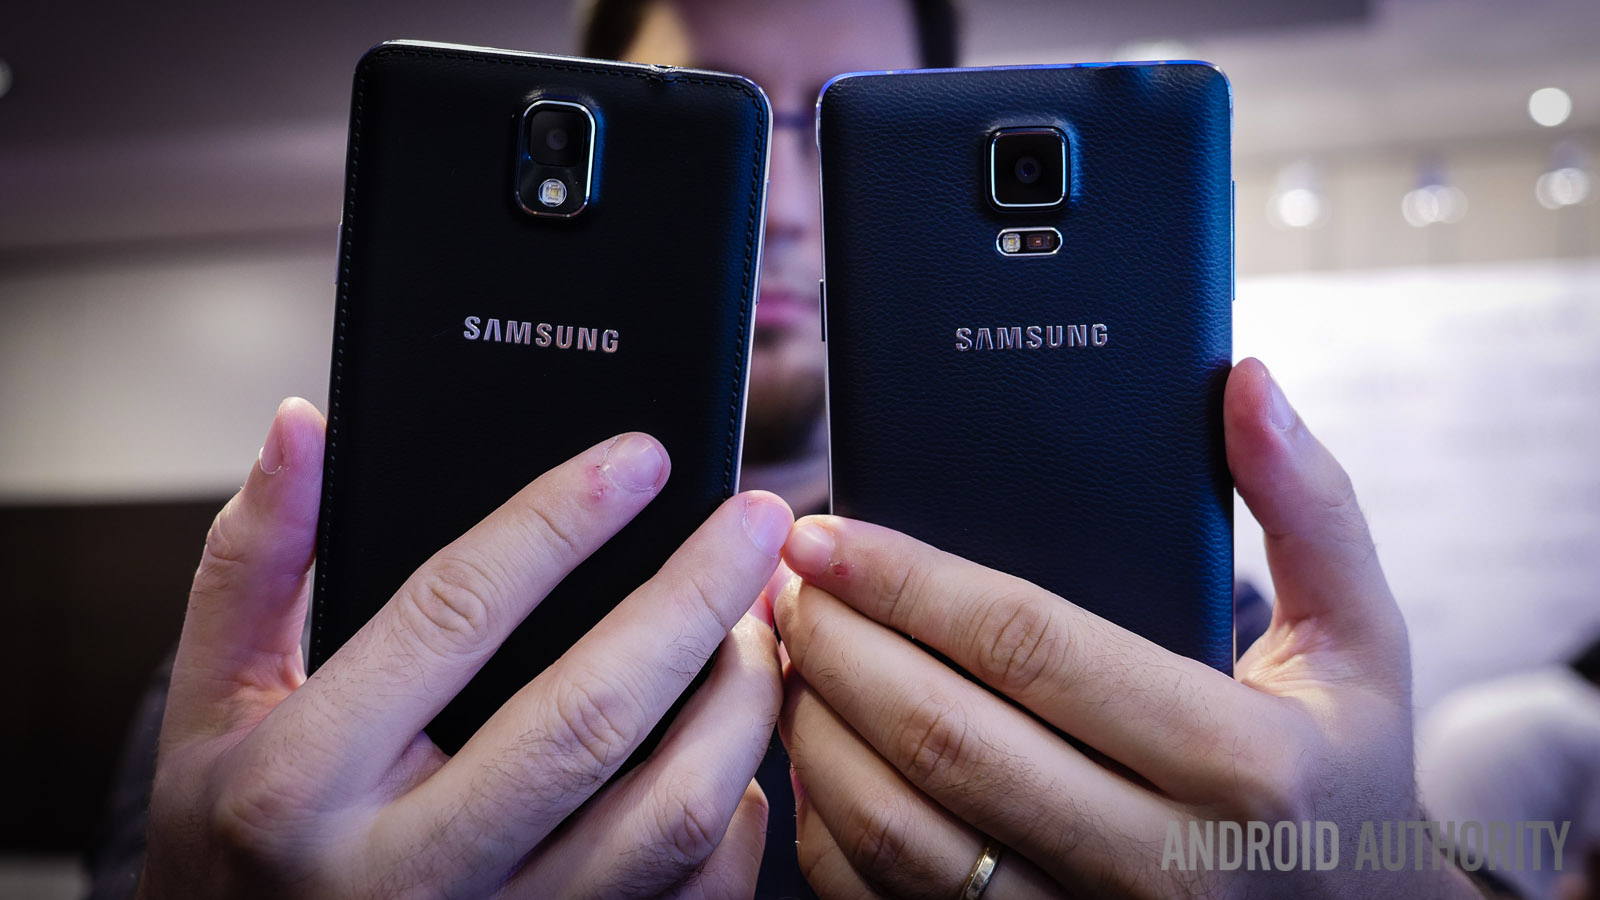 samsung galaxy note 4 vs note 3 quick look aa (11 of 11)